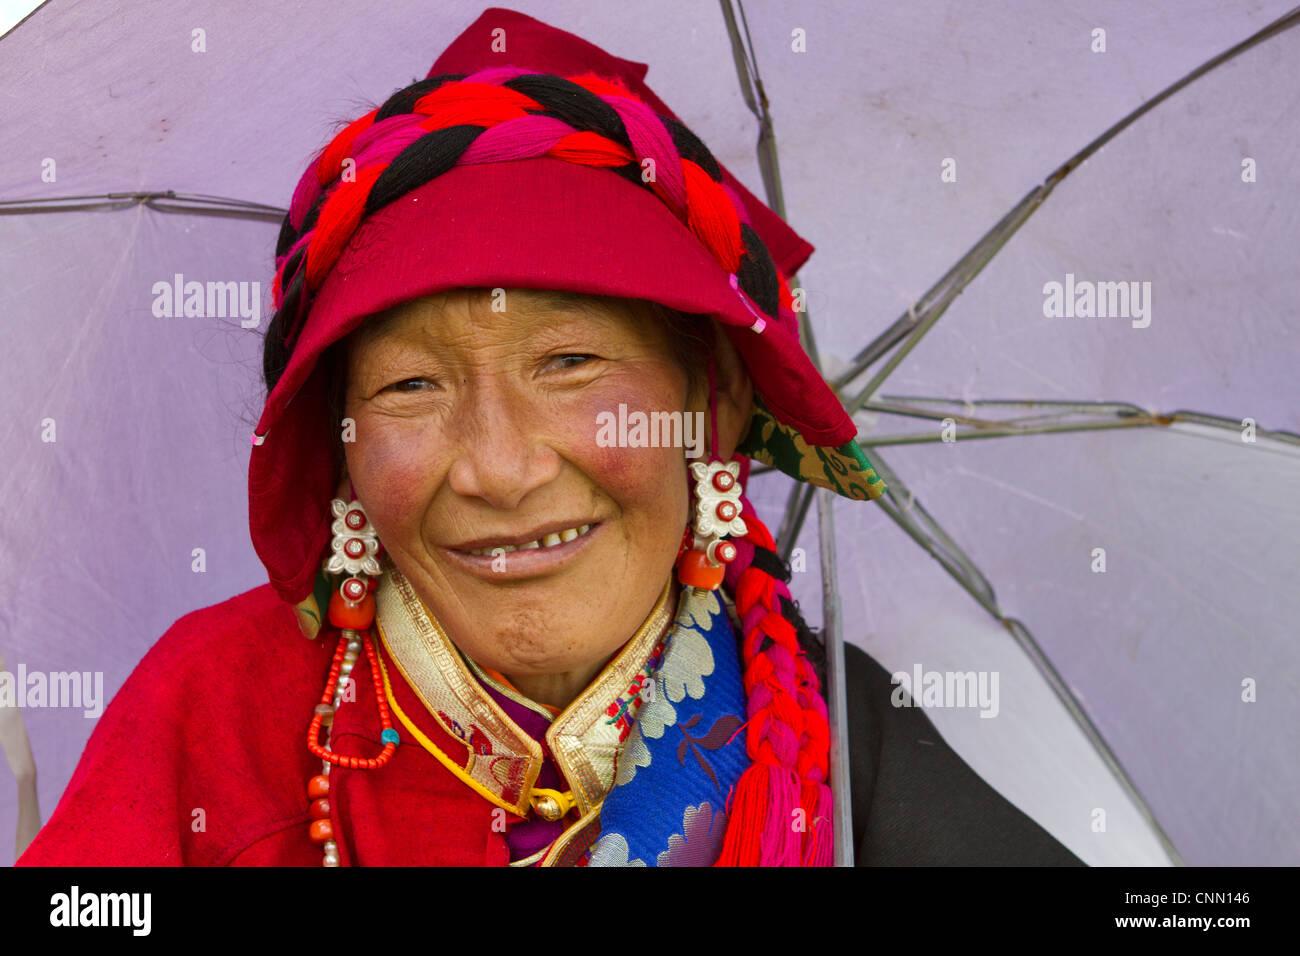 Portrait Nomad woman ceremony horse festival secret mountain Tagong area western China Tibet Asia Stock Photo